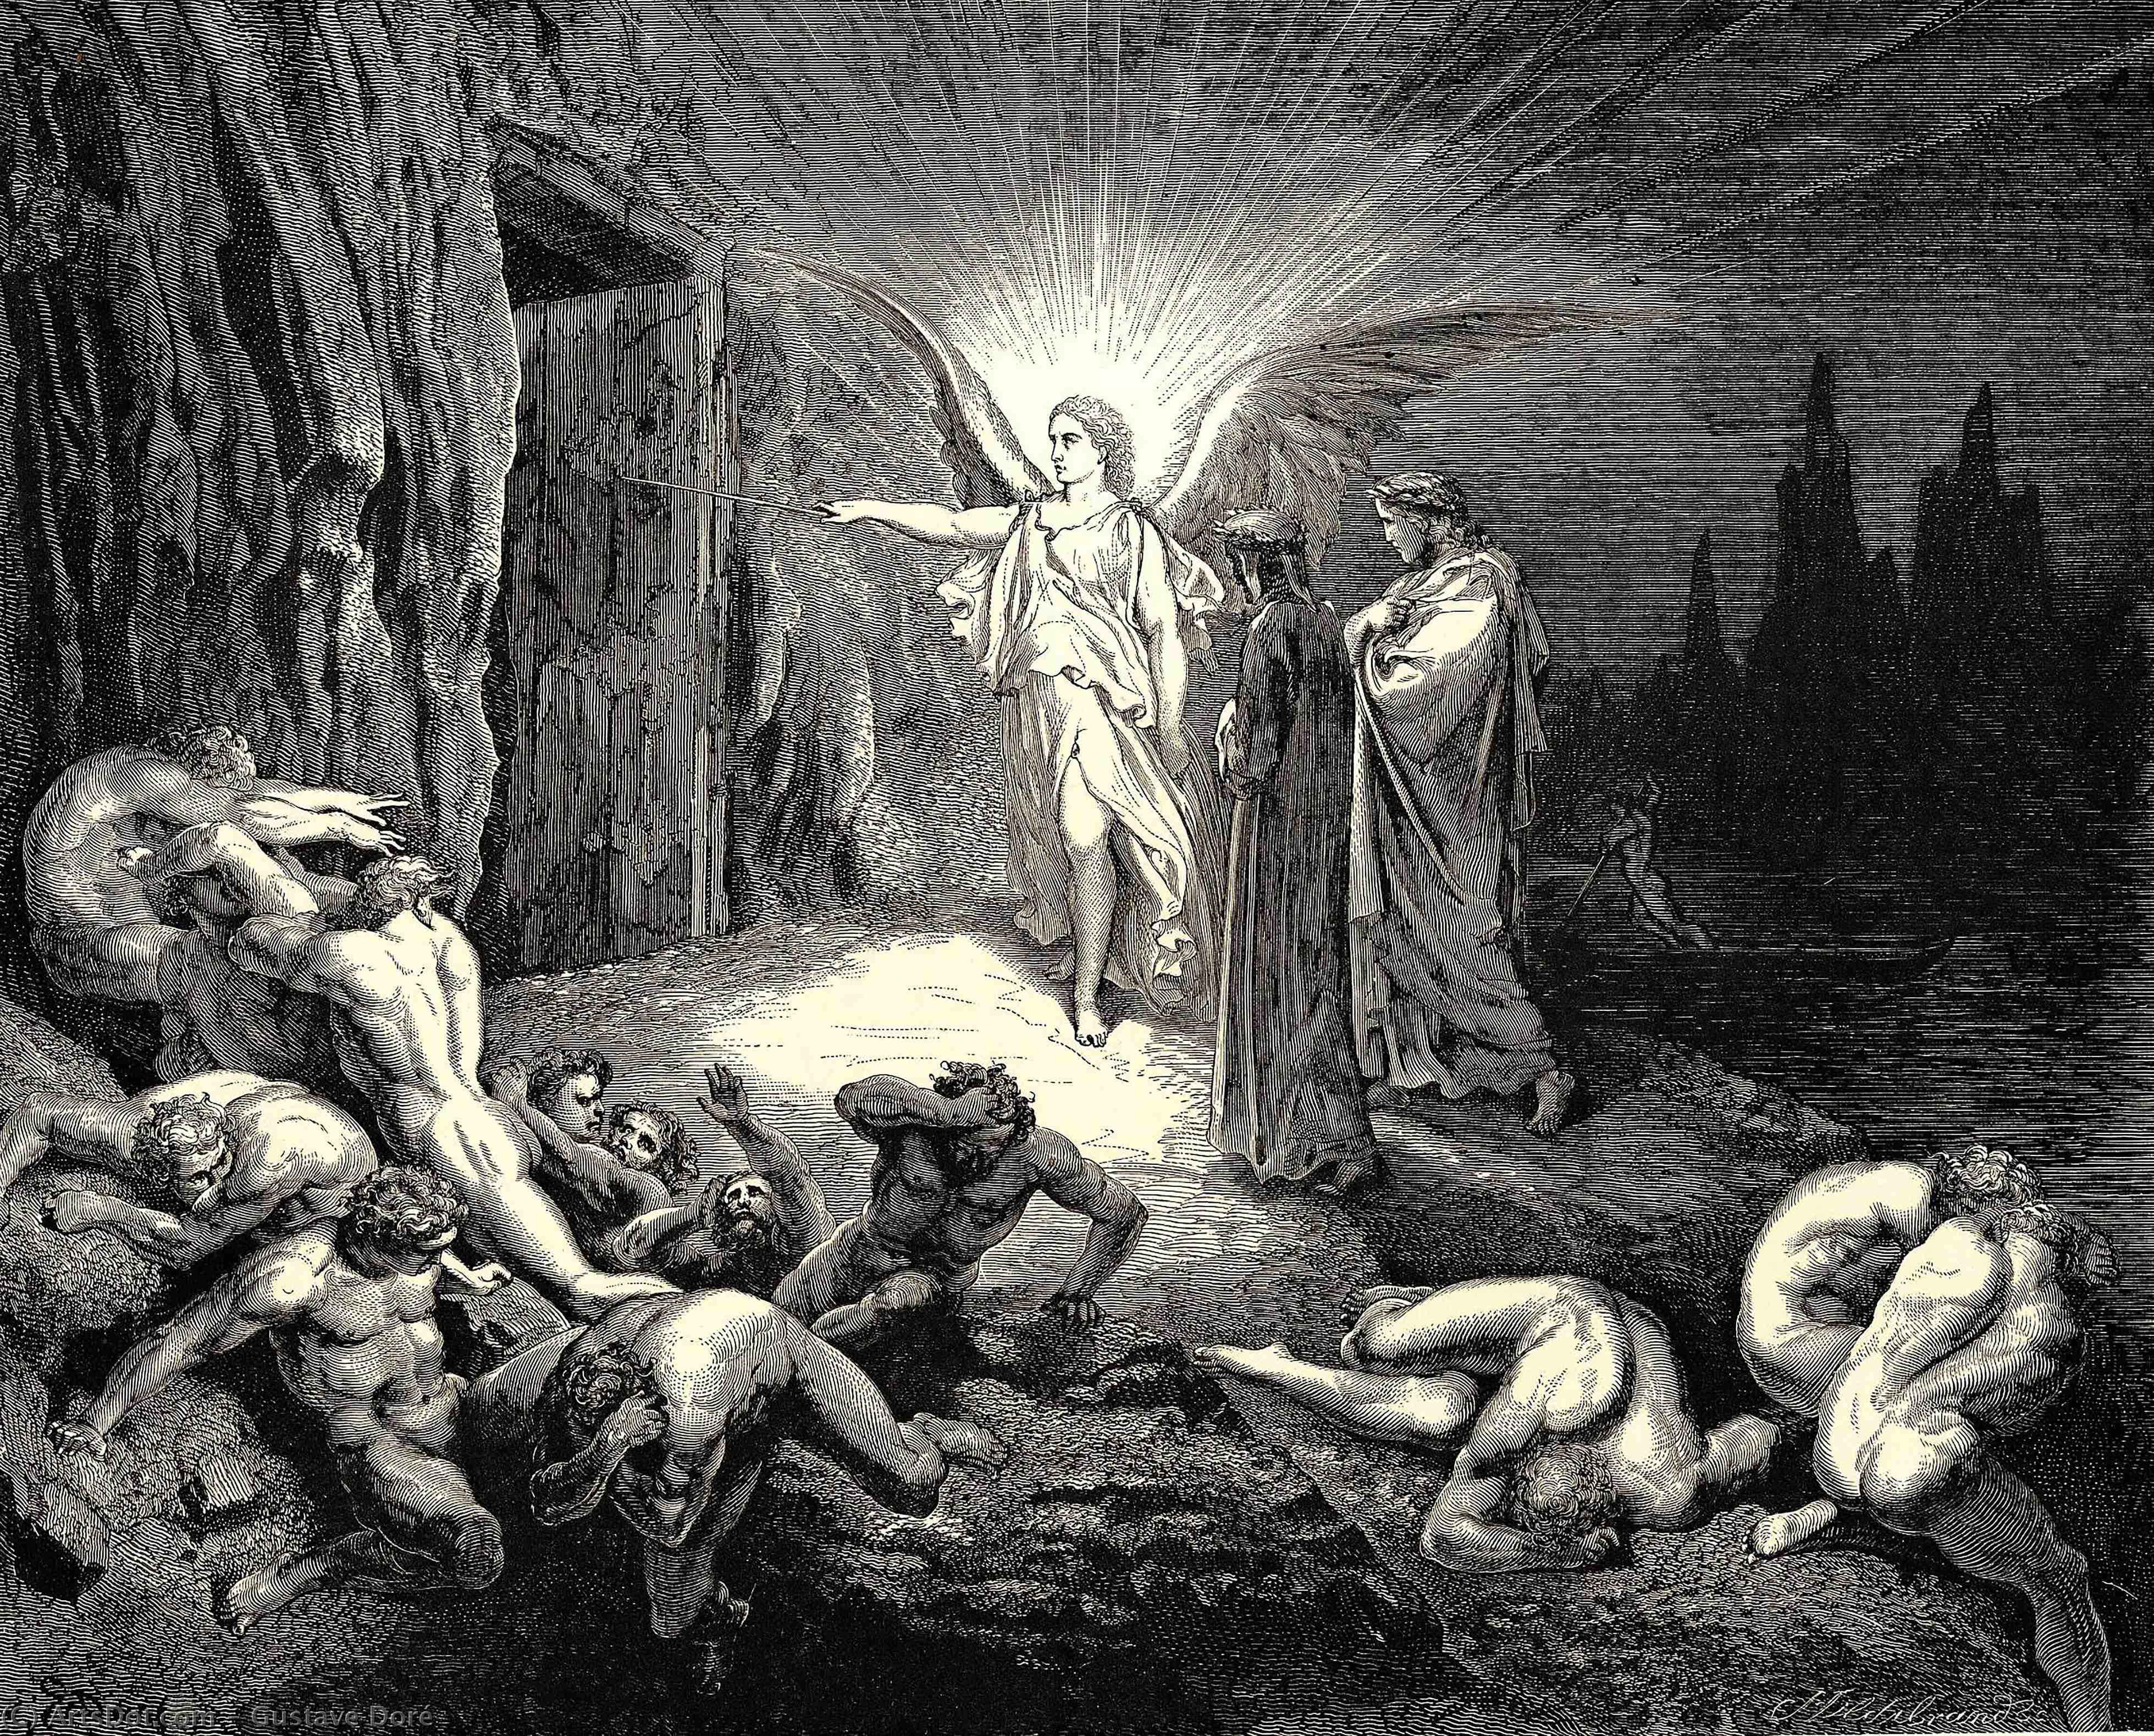 Wikoo.org - موسوعة الفنون الجميلة - اللوحة، العمل الفني Paul Gustave Doré - The Inferno, Canto 9, lines 87-89. To the gate He came, and with his wand touch’d it, whereat Open without impediment it flew.